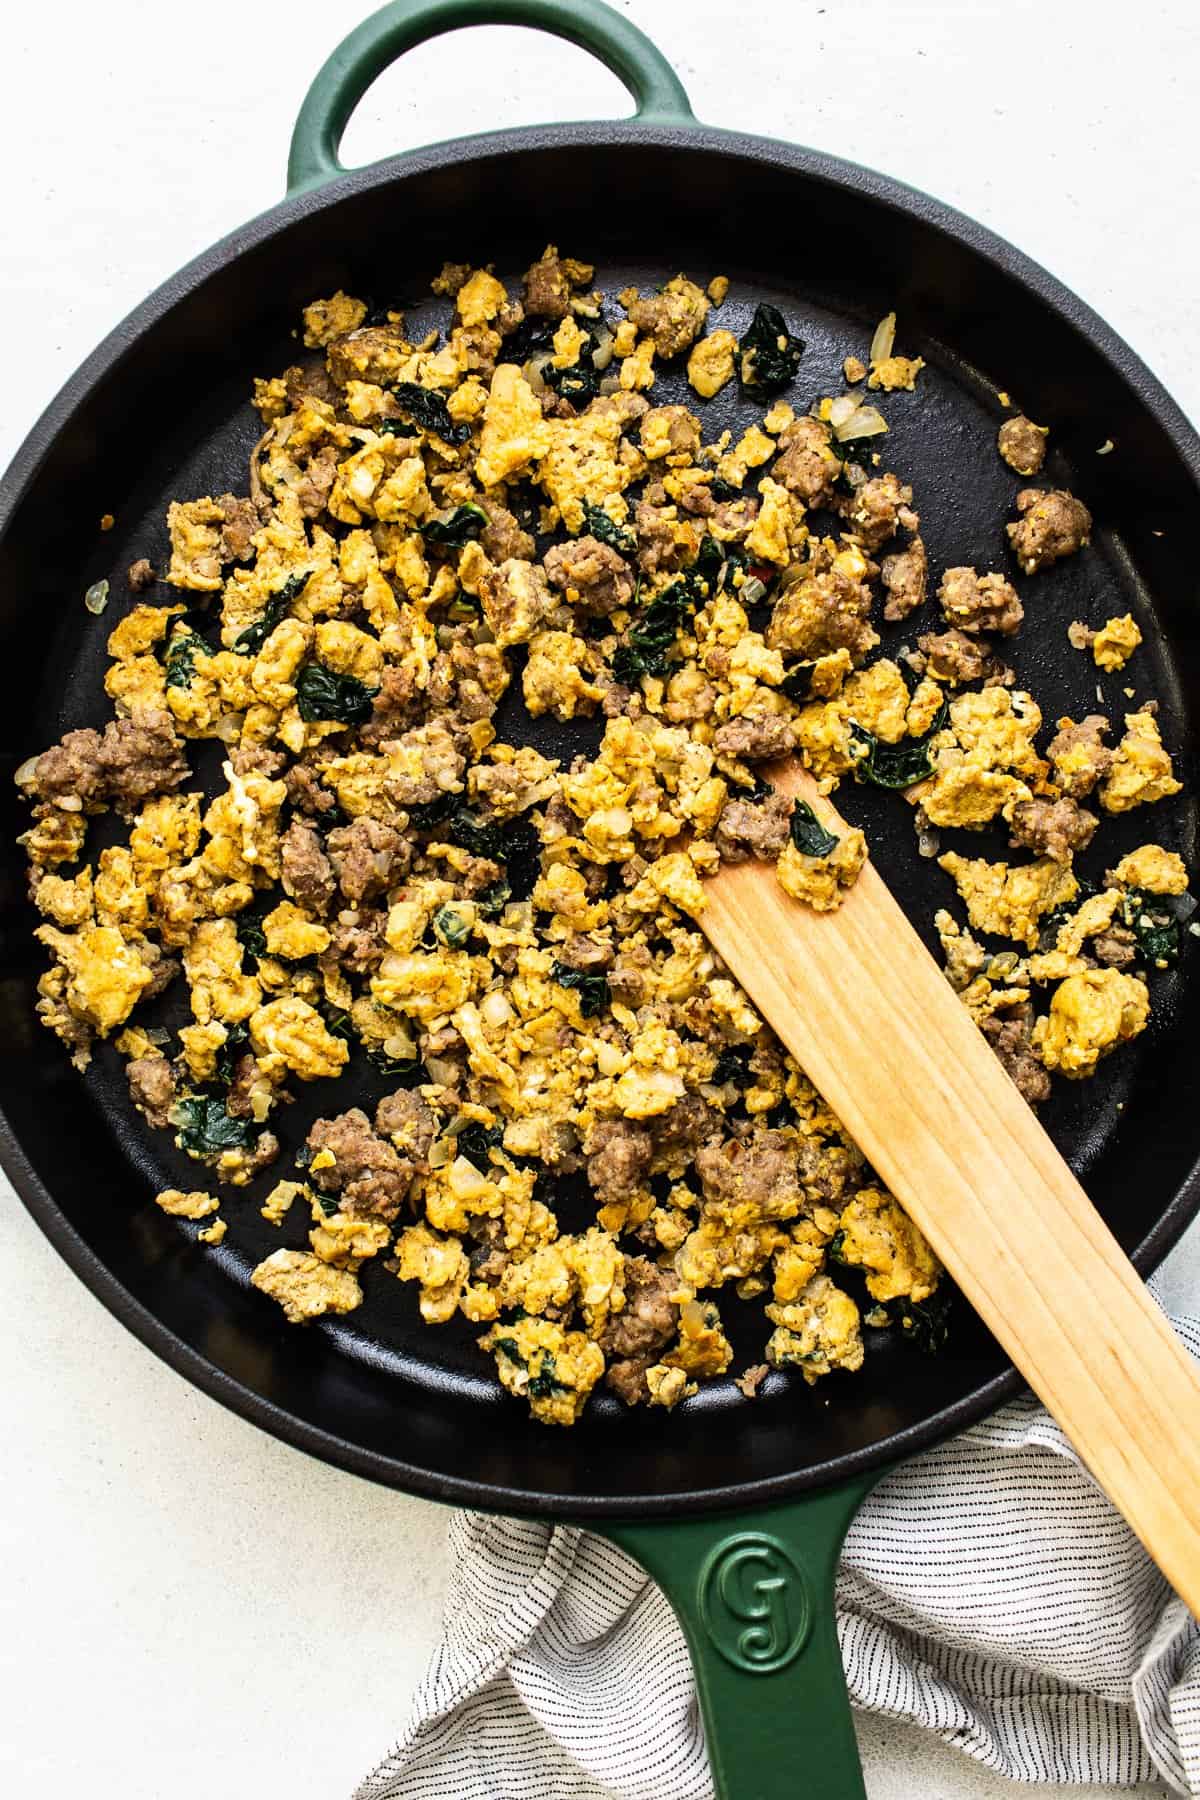 Scrambled eggs, breakfast sausage and kale sauteed in a cast iron skillet.